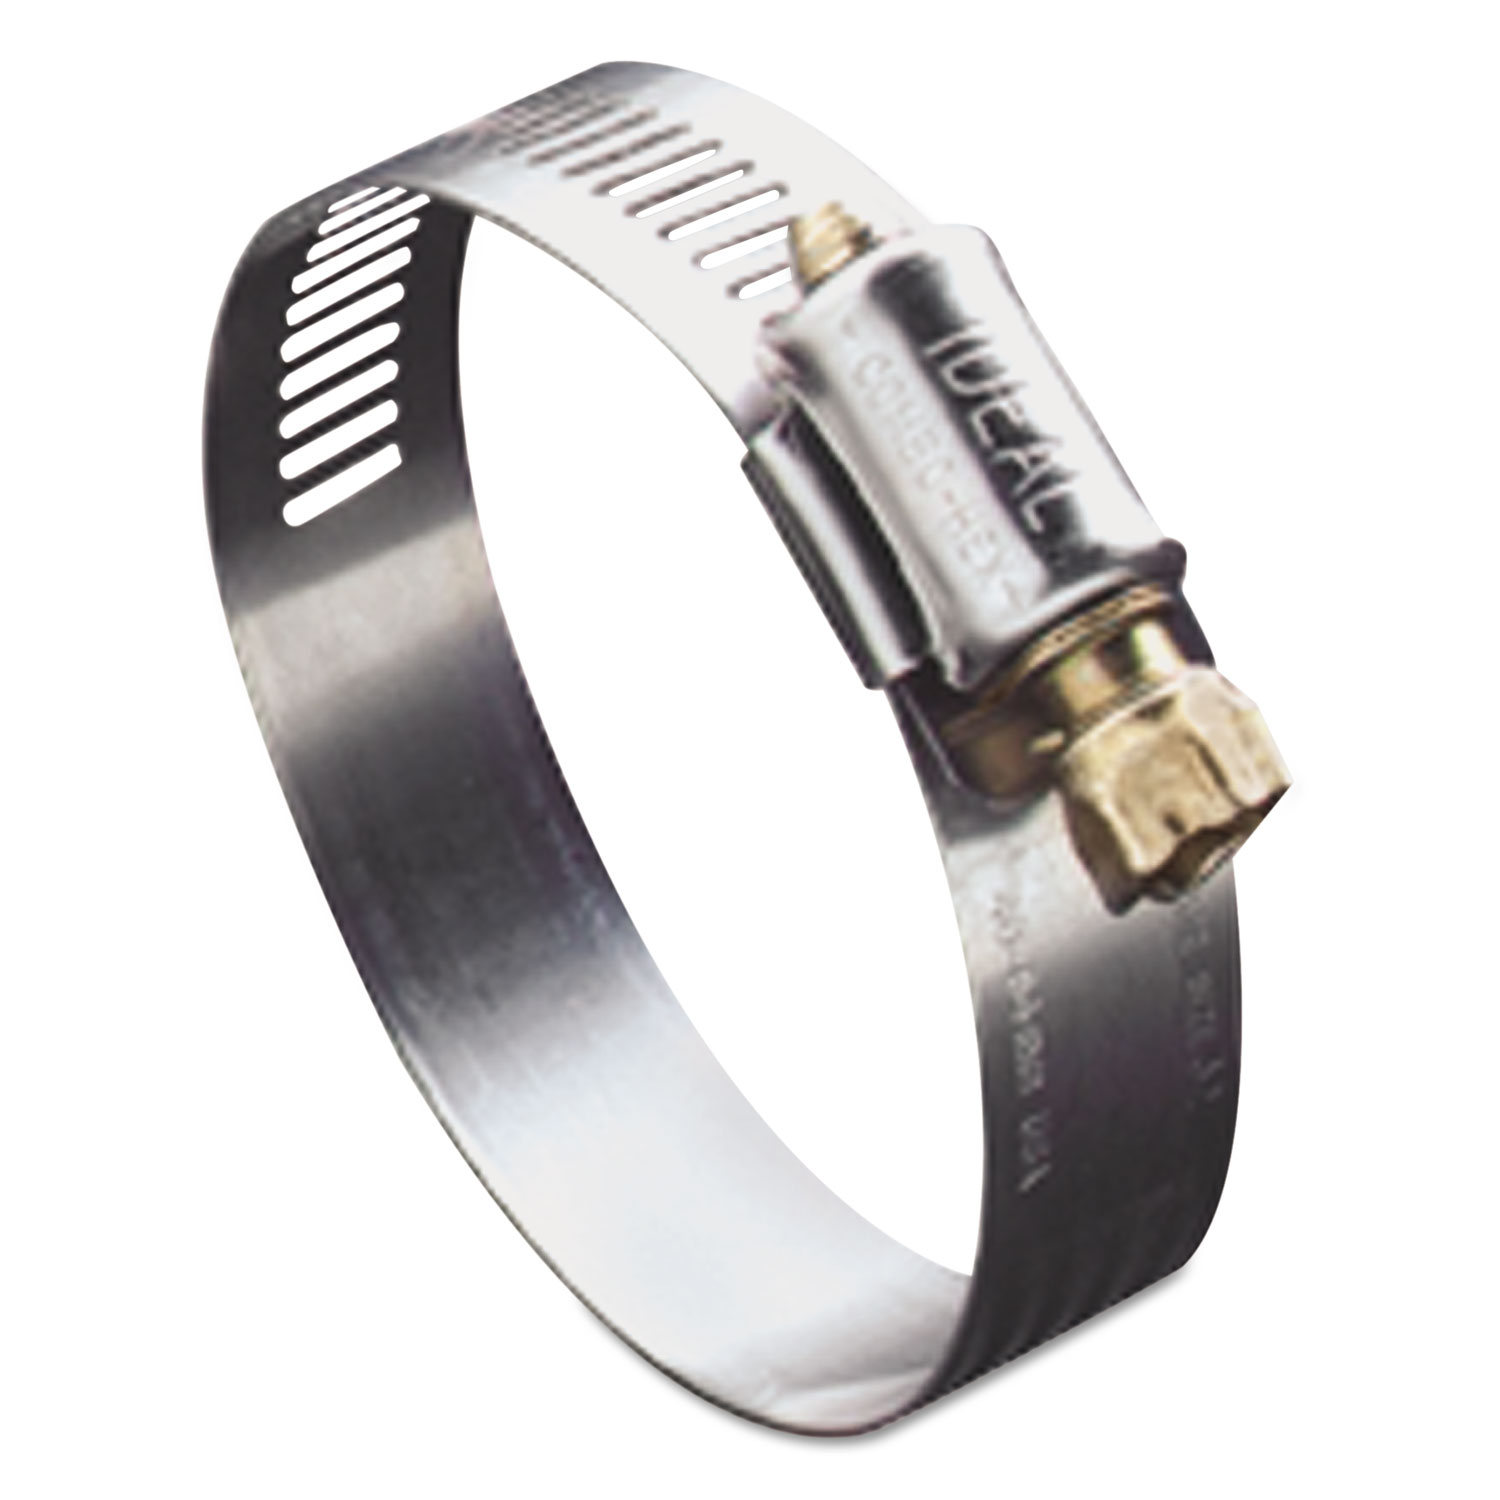 57 Series Worm Drive Clamp, 3/8 to 7/8, 1/2 Wide